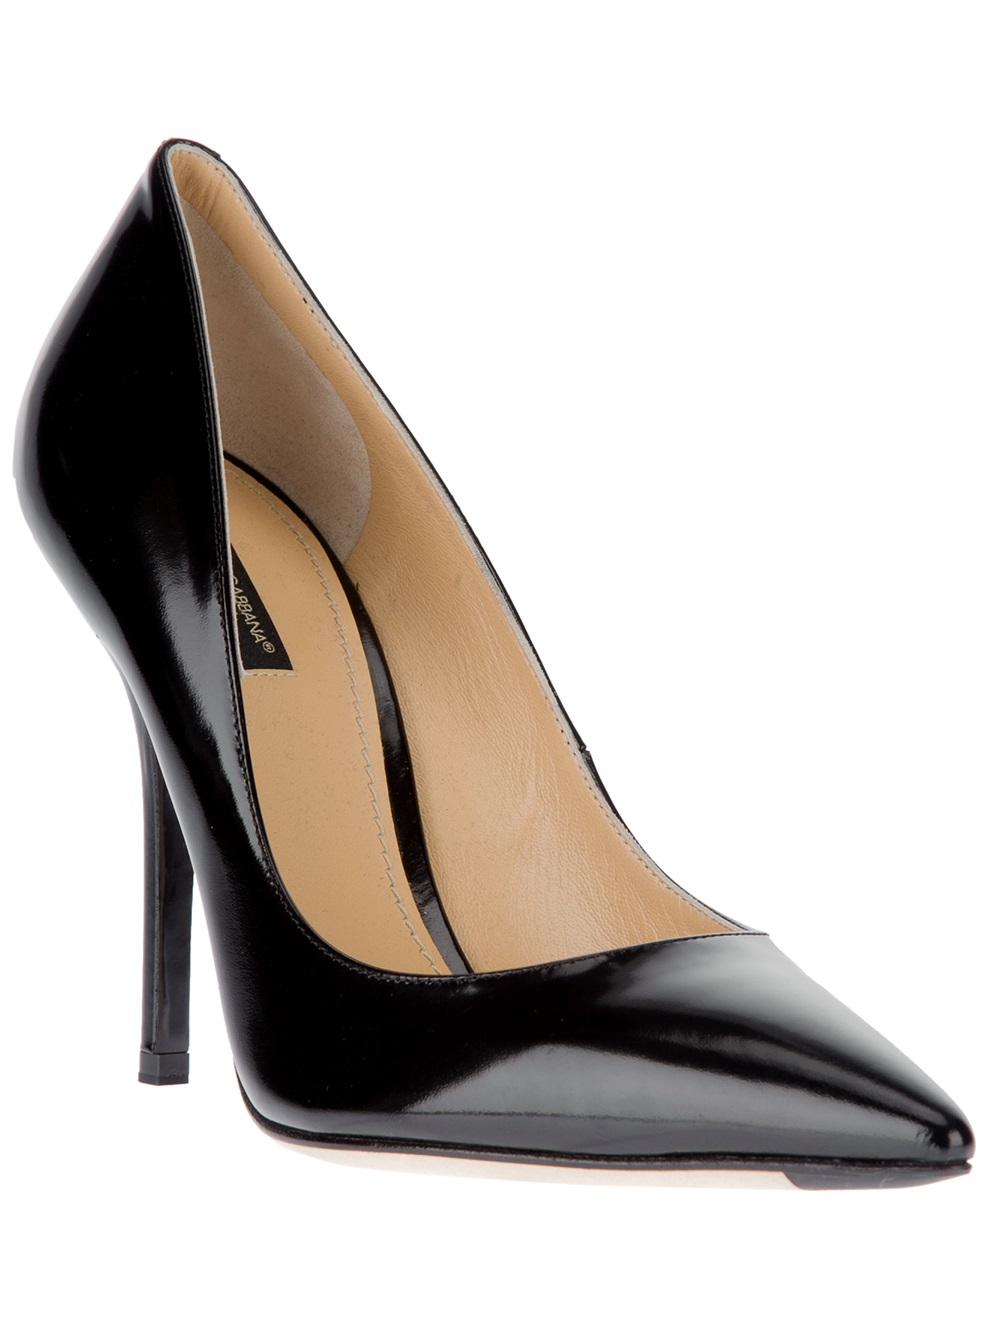 Three black leather pumps from Dolce \u0026 